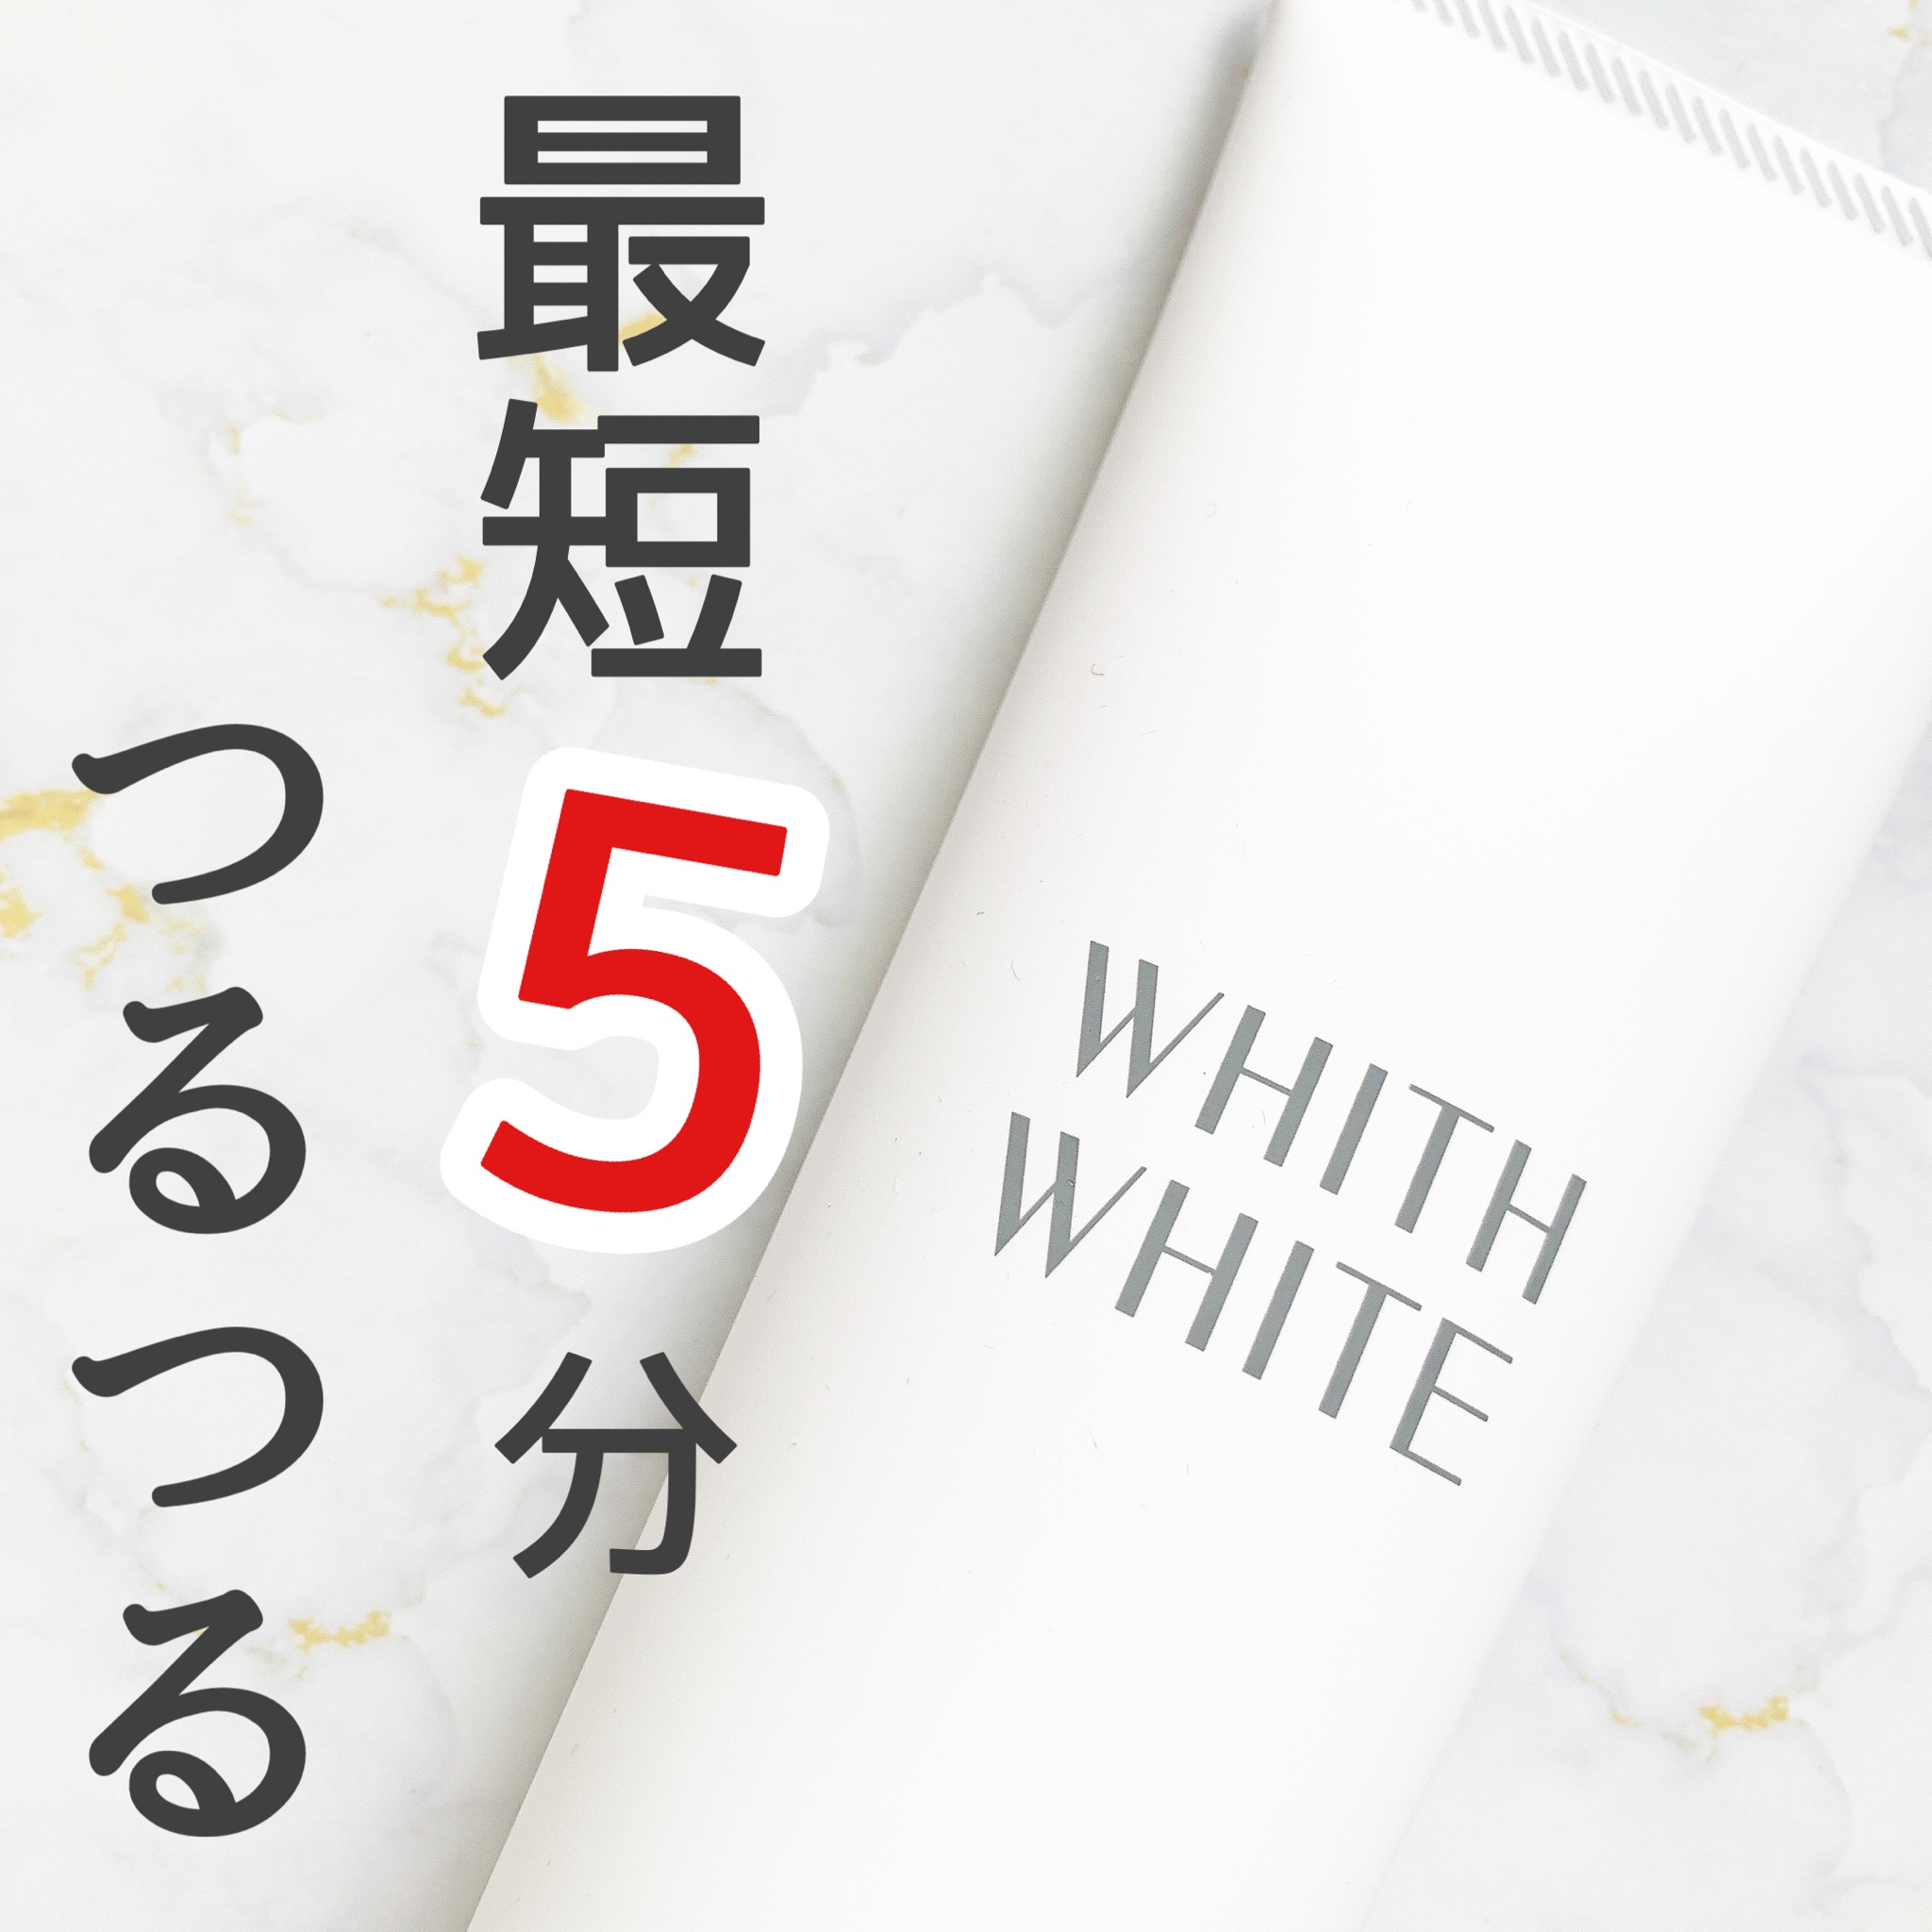 WHITH WHITE / 除毛クリームの公式商品情報｜美容・化粧品情報は